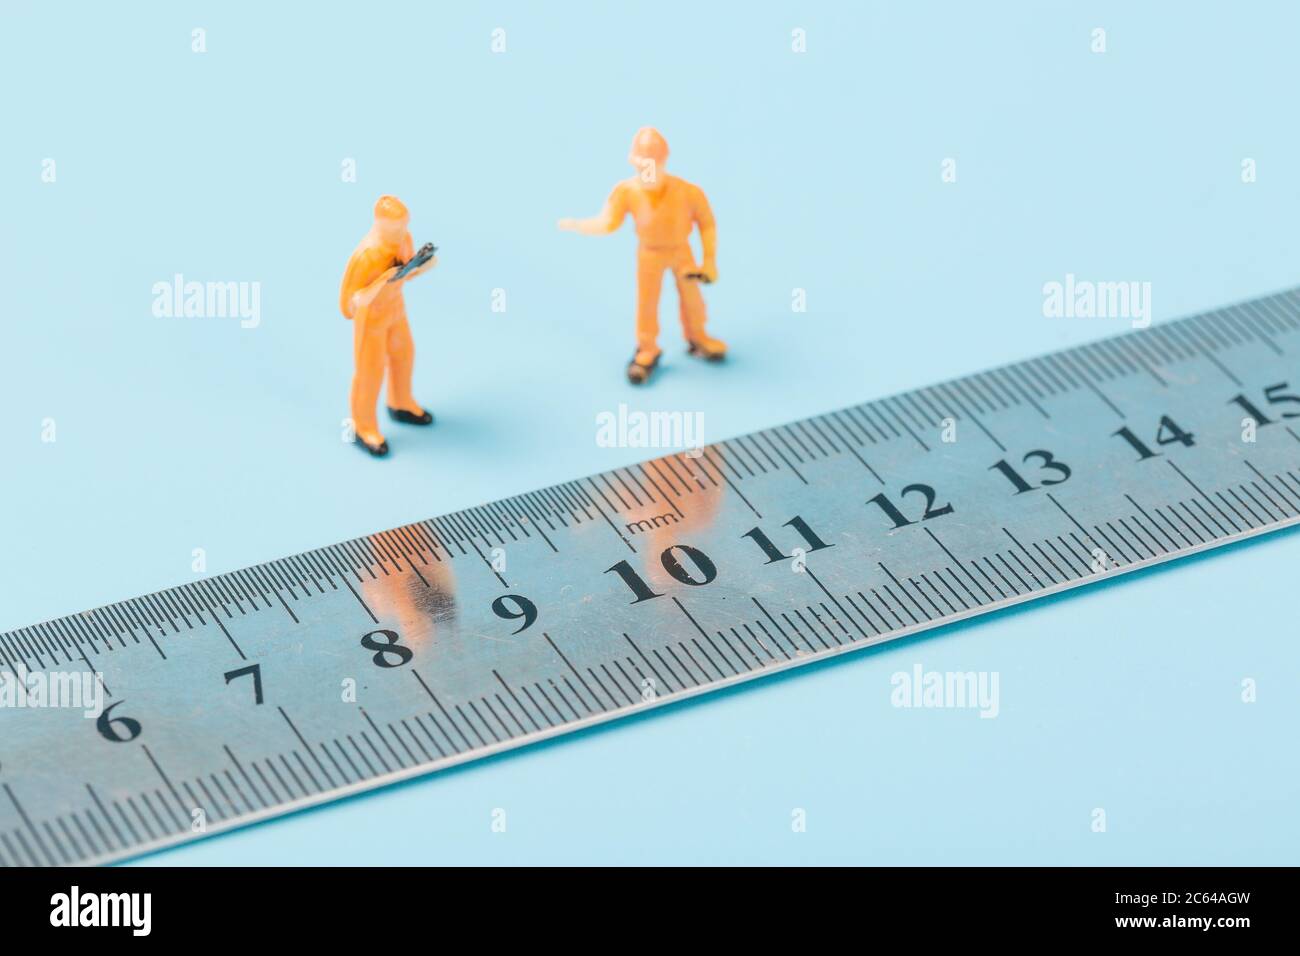 Small metal ruler Stock Photo by ©Jaros75 99008034